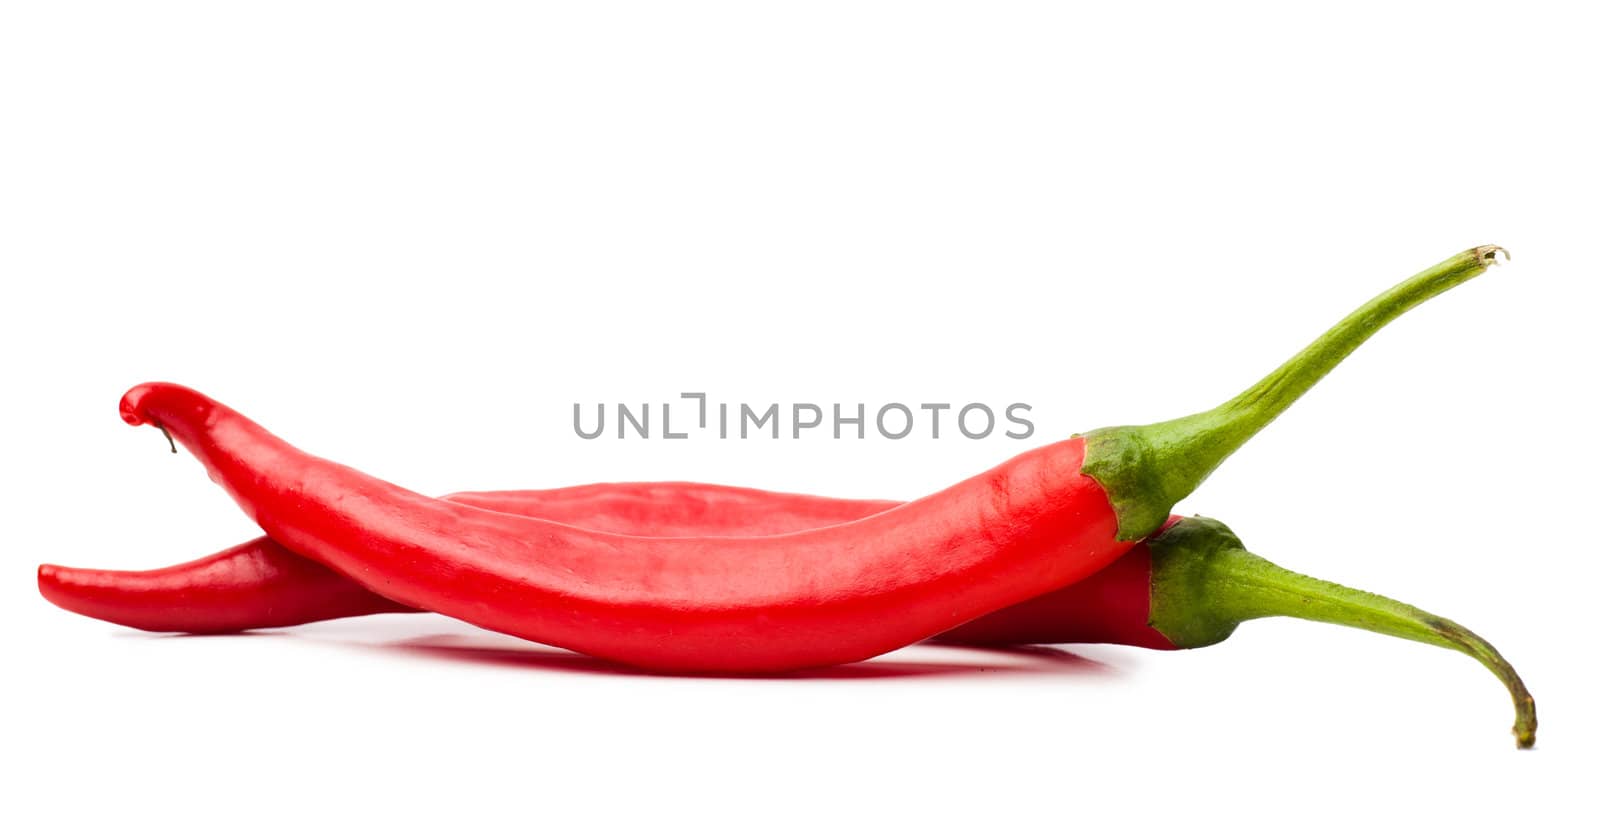 Red chili peppers by AGorohov